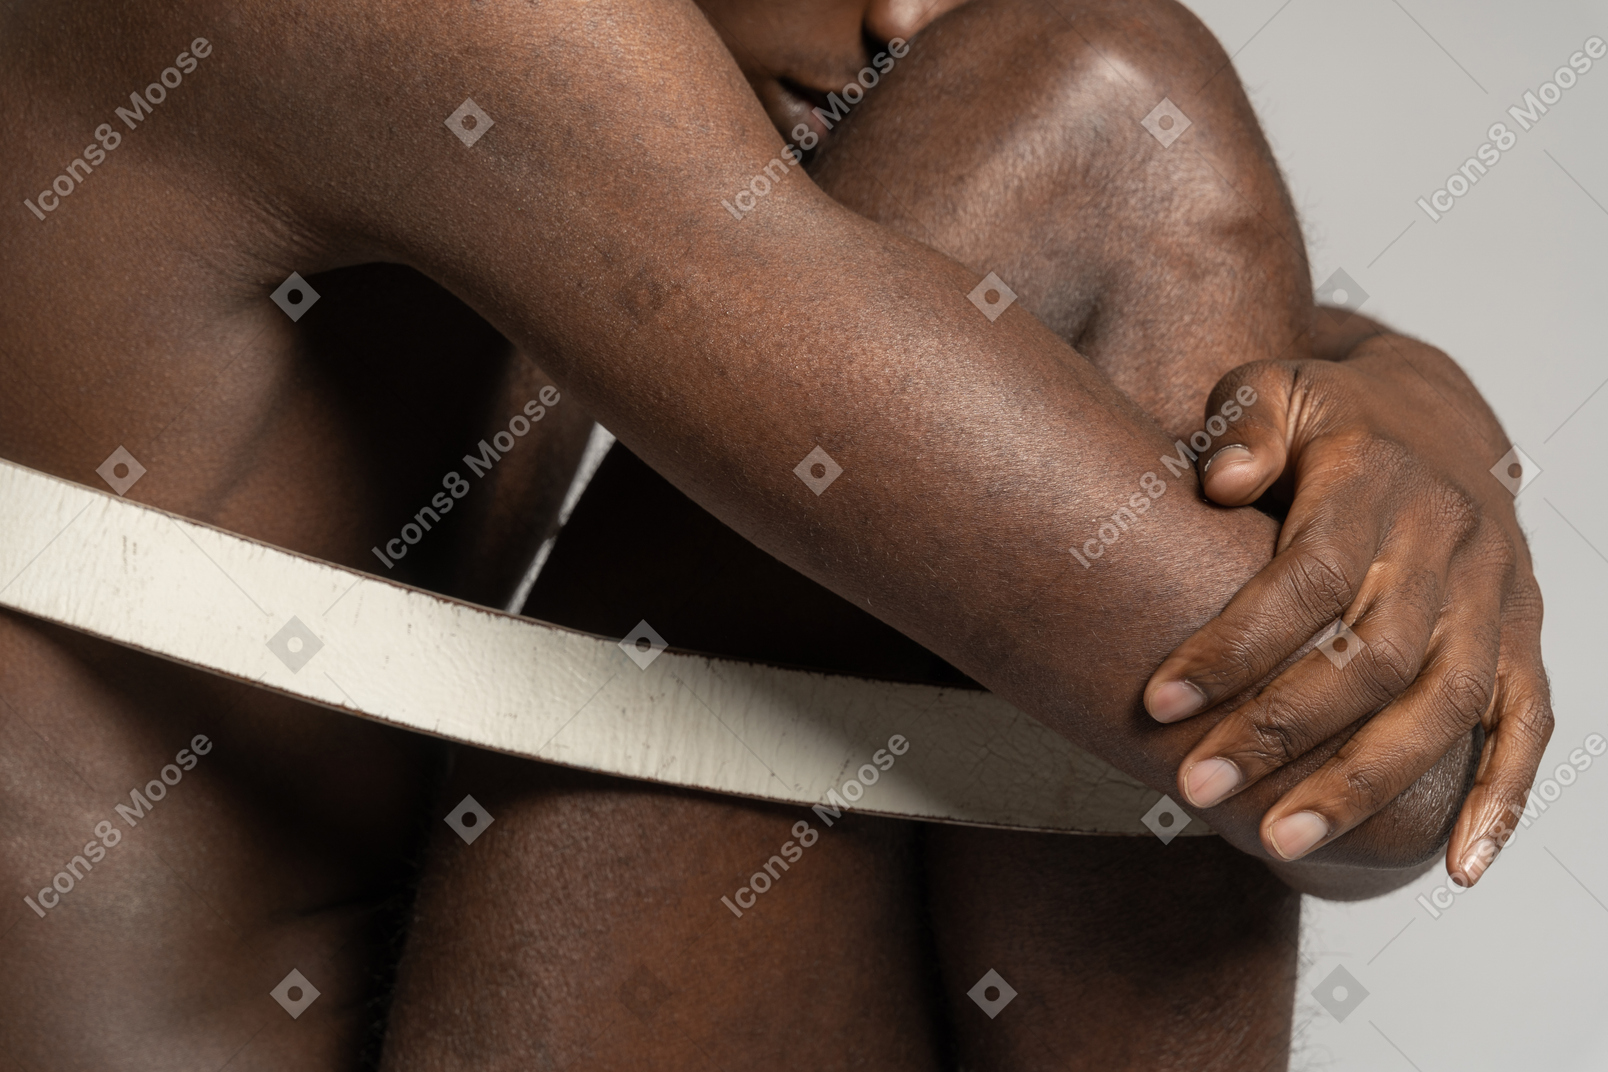 A man tied with a white belt